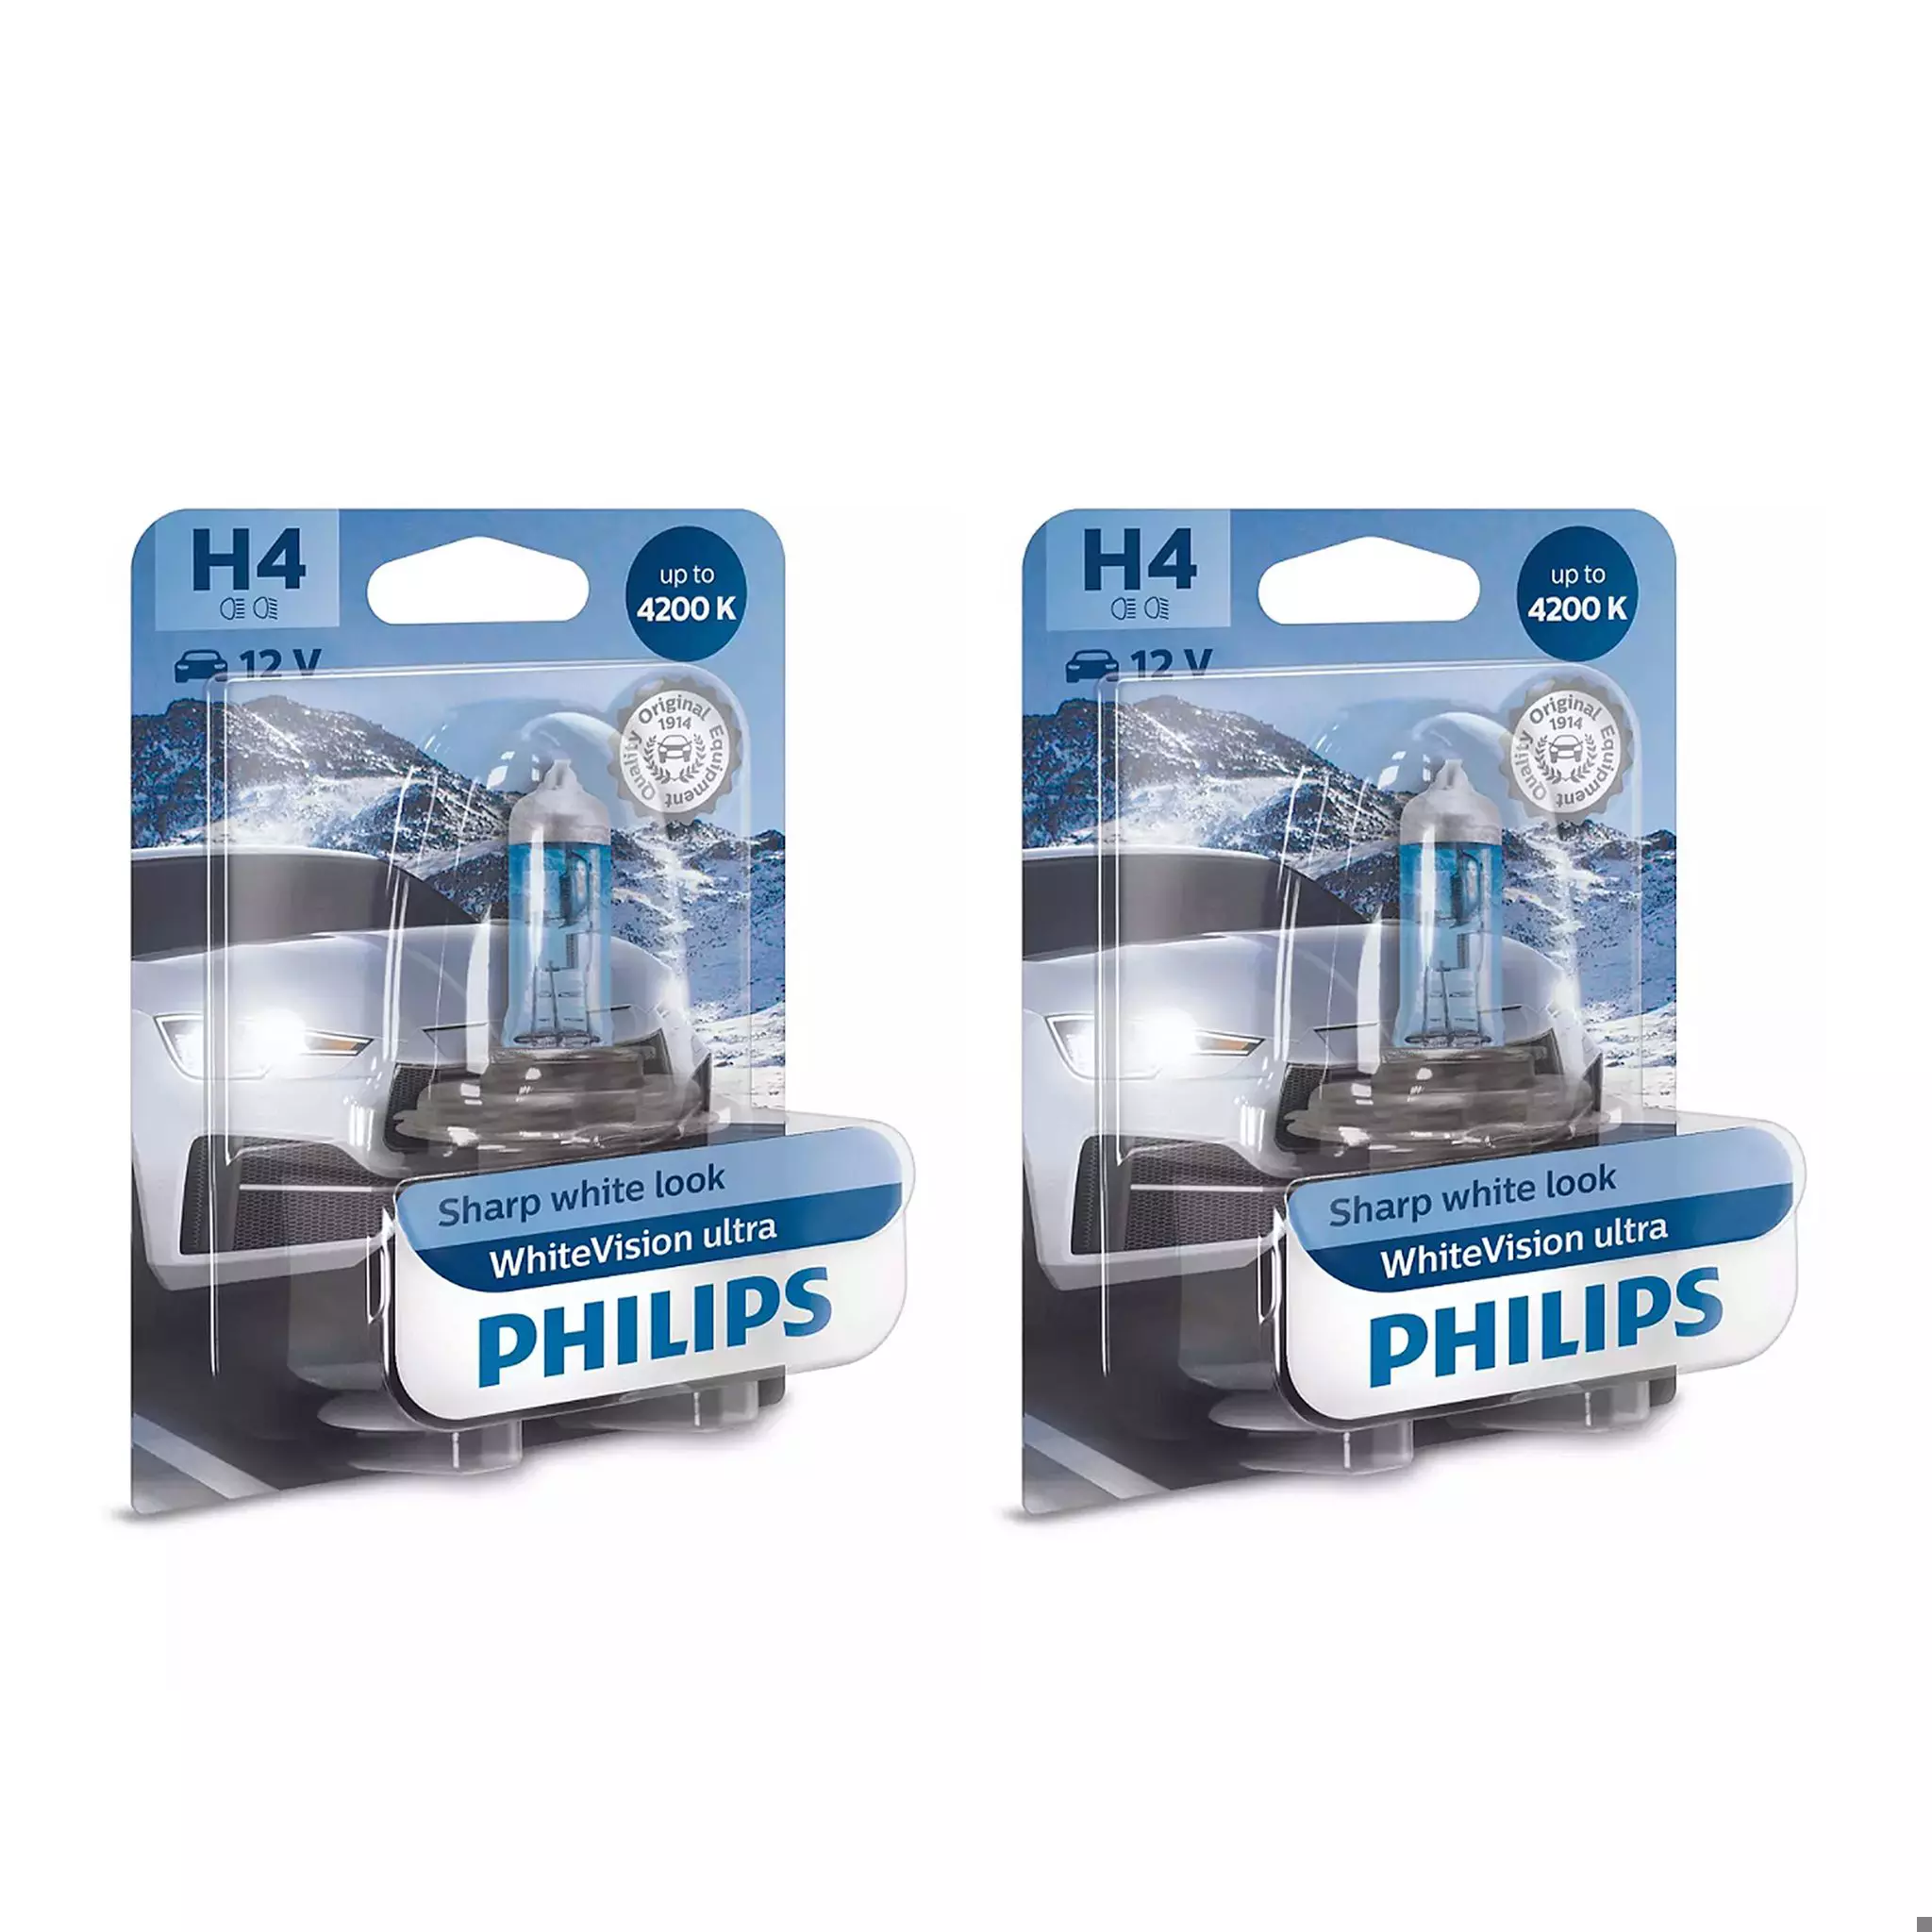 Halogeenipolttimo Philips Whitevision Ultra, 55W, H4,